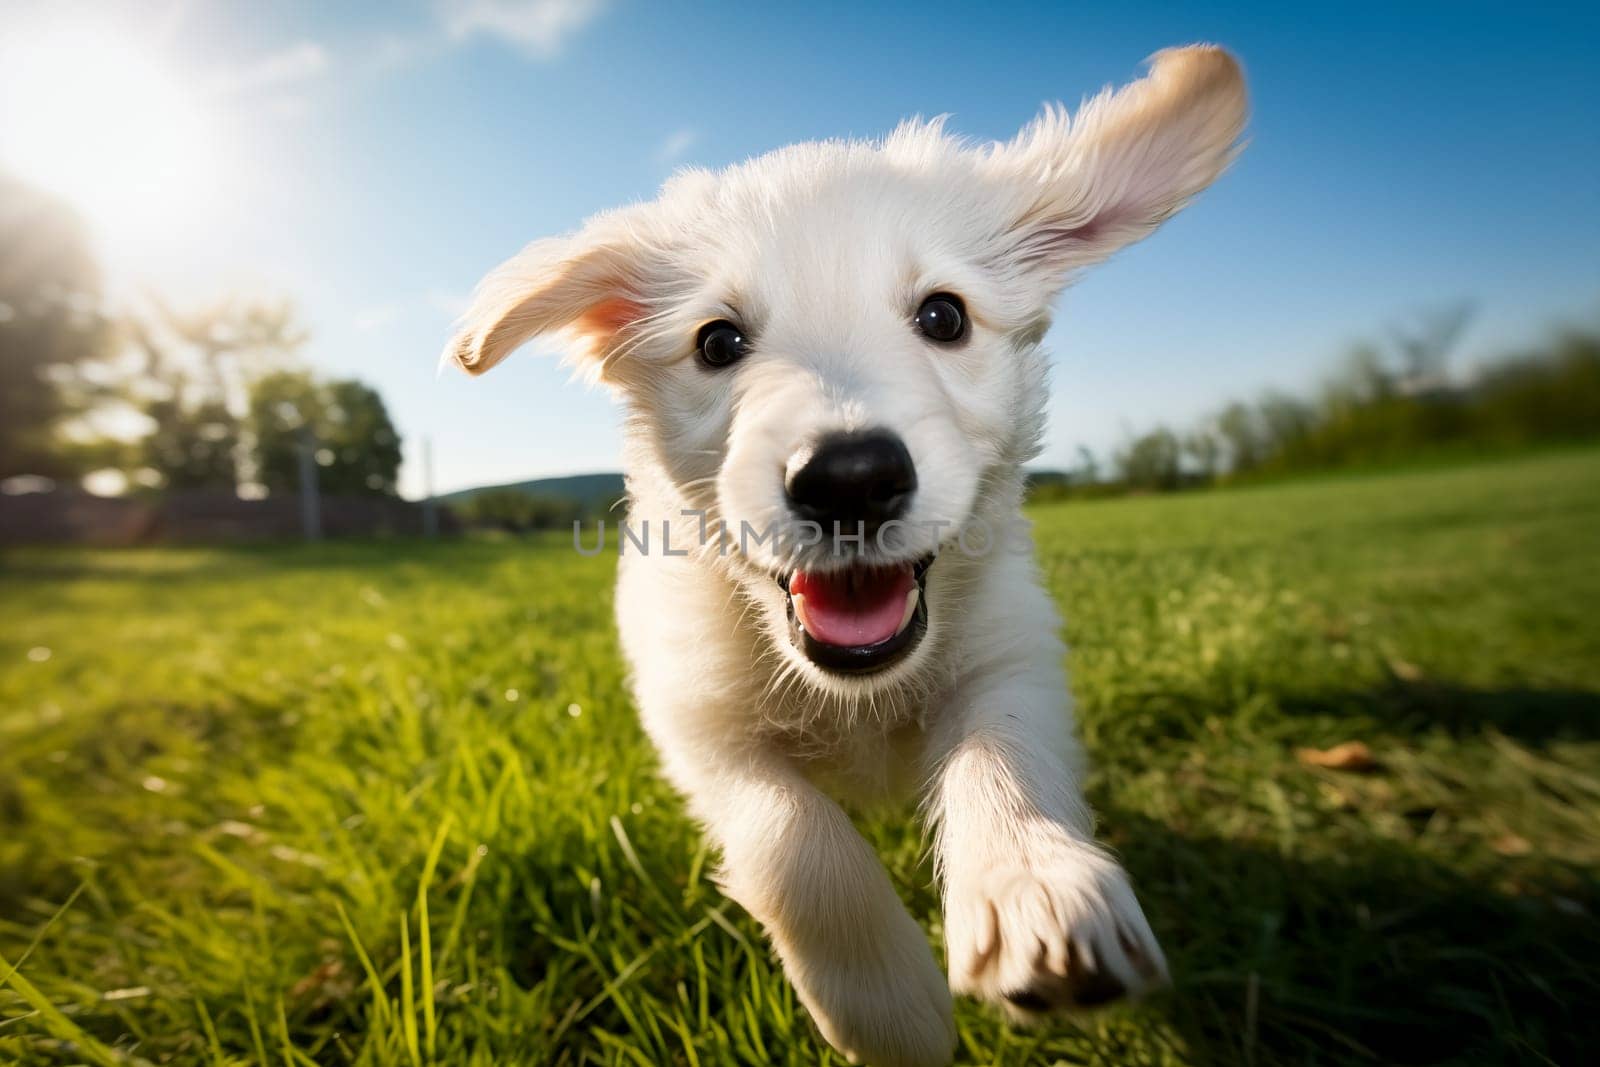 Joyful Puppy Playing Outdoors in Sunny Weather by dimol